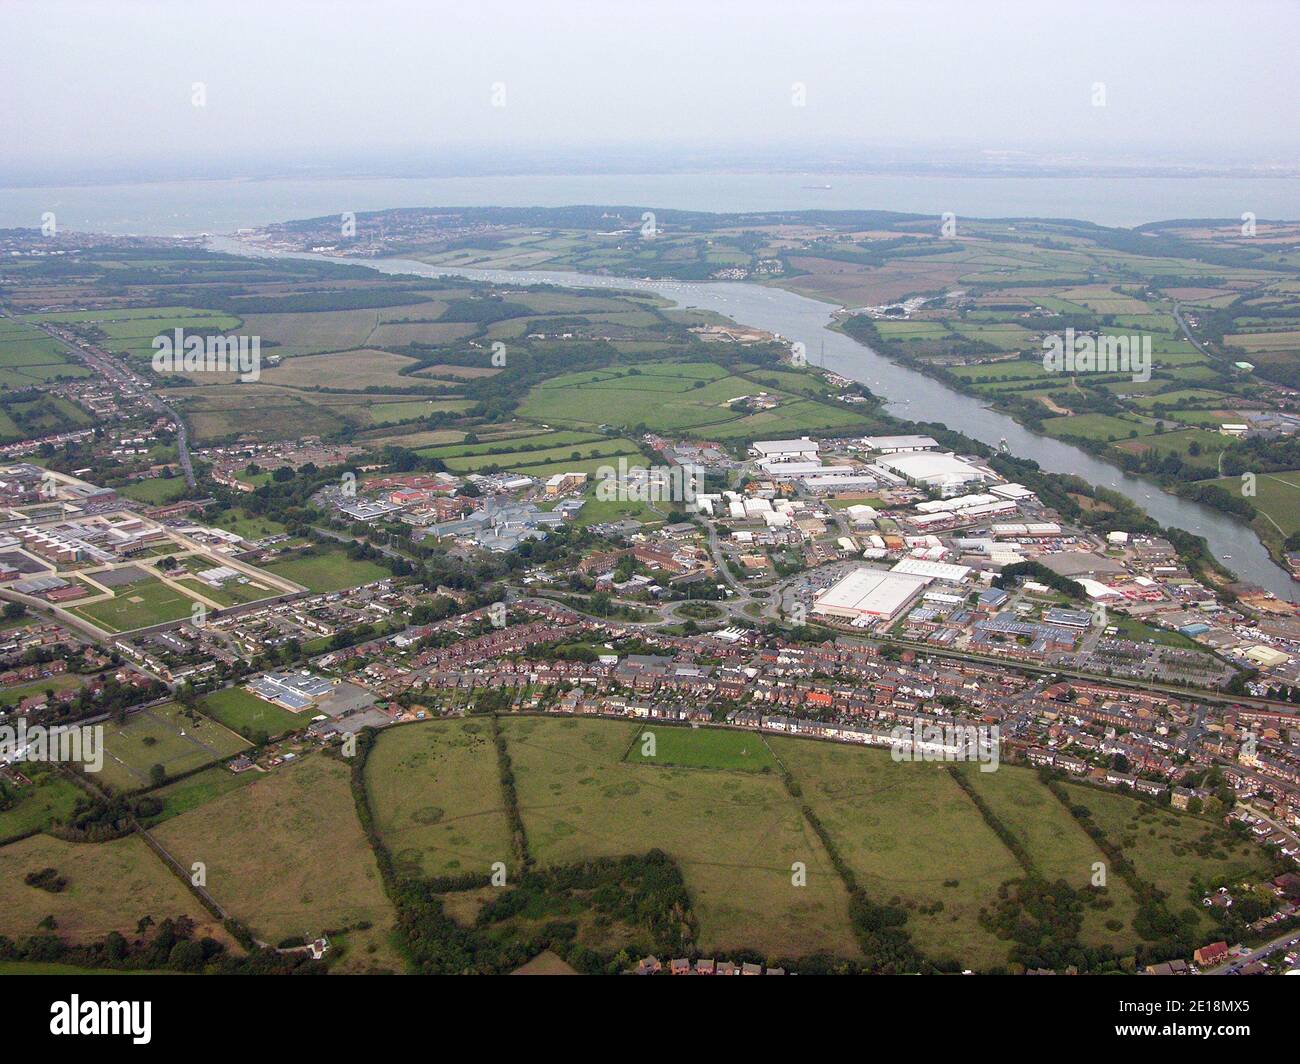 aerial view of Newport town, with St Mary's Hospital & Dodnor Industrial Estate prominent, Isle of Wight, UK Stock Photo